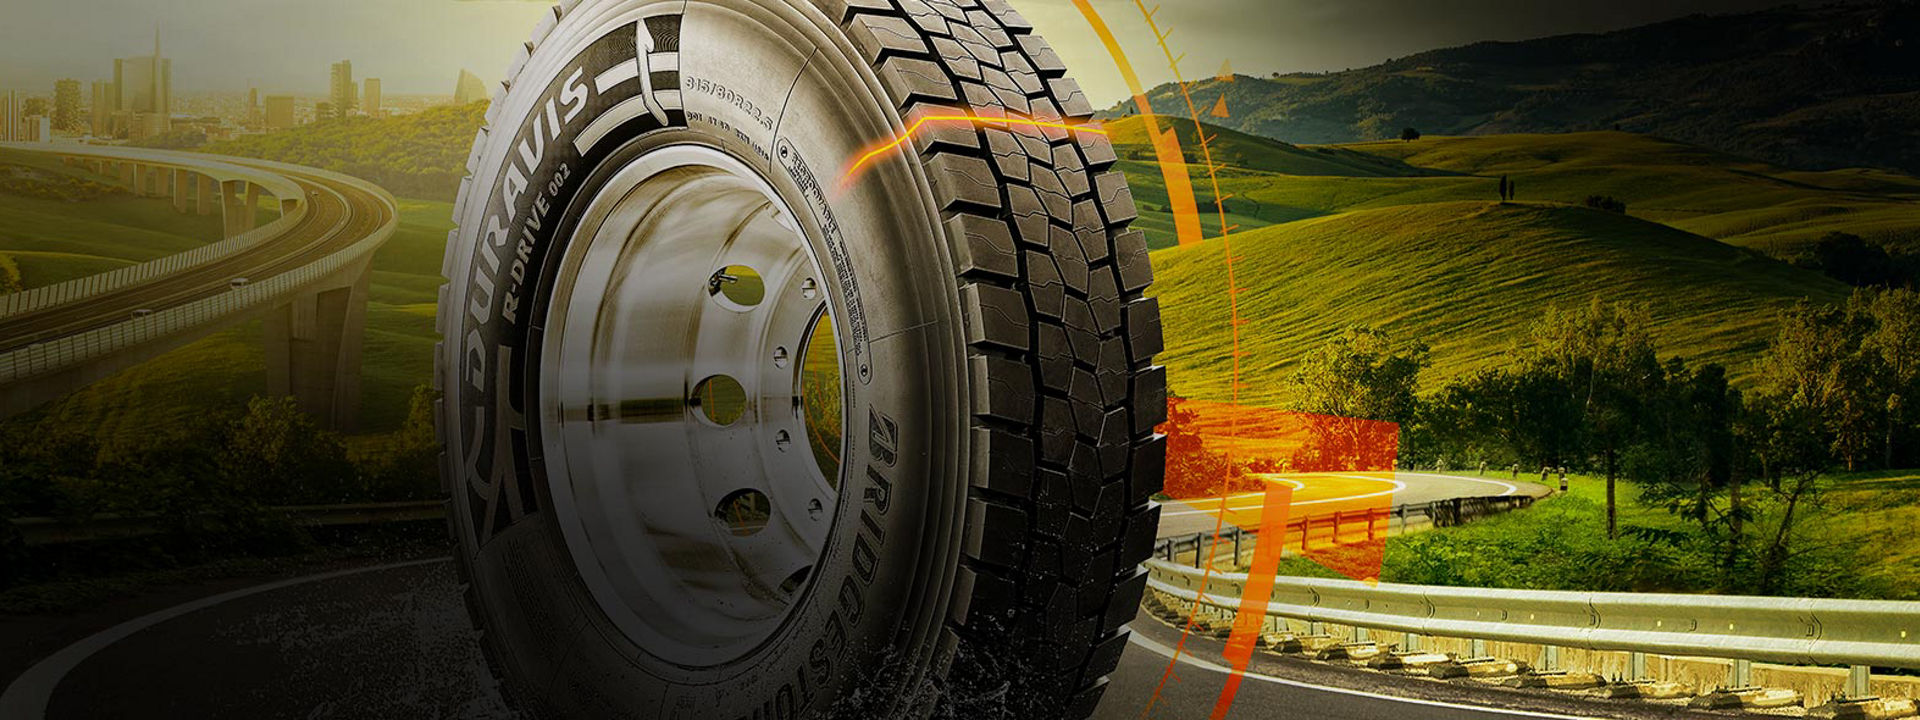 This image shows the Bridgestone Duravis R002 tyre driving down a highway with graphics that share its unique key features.